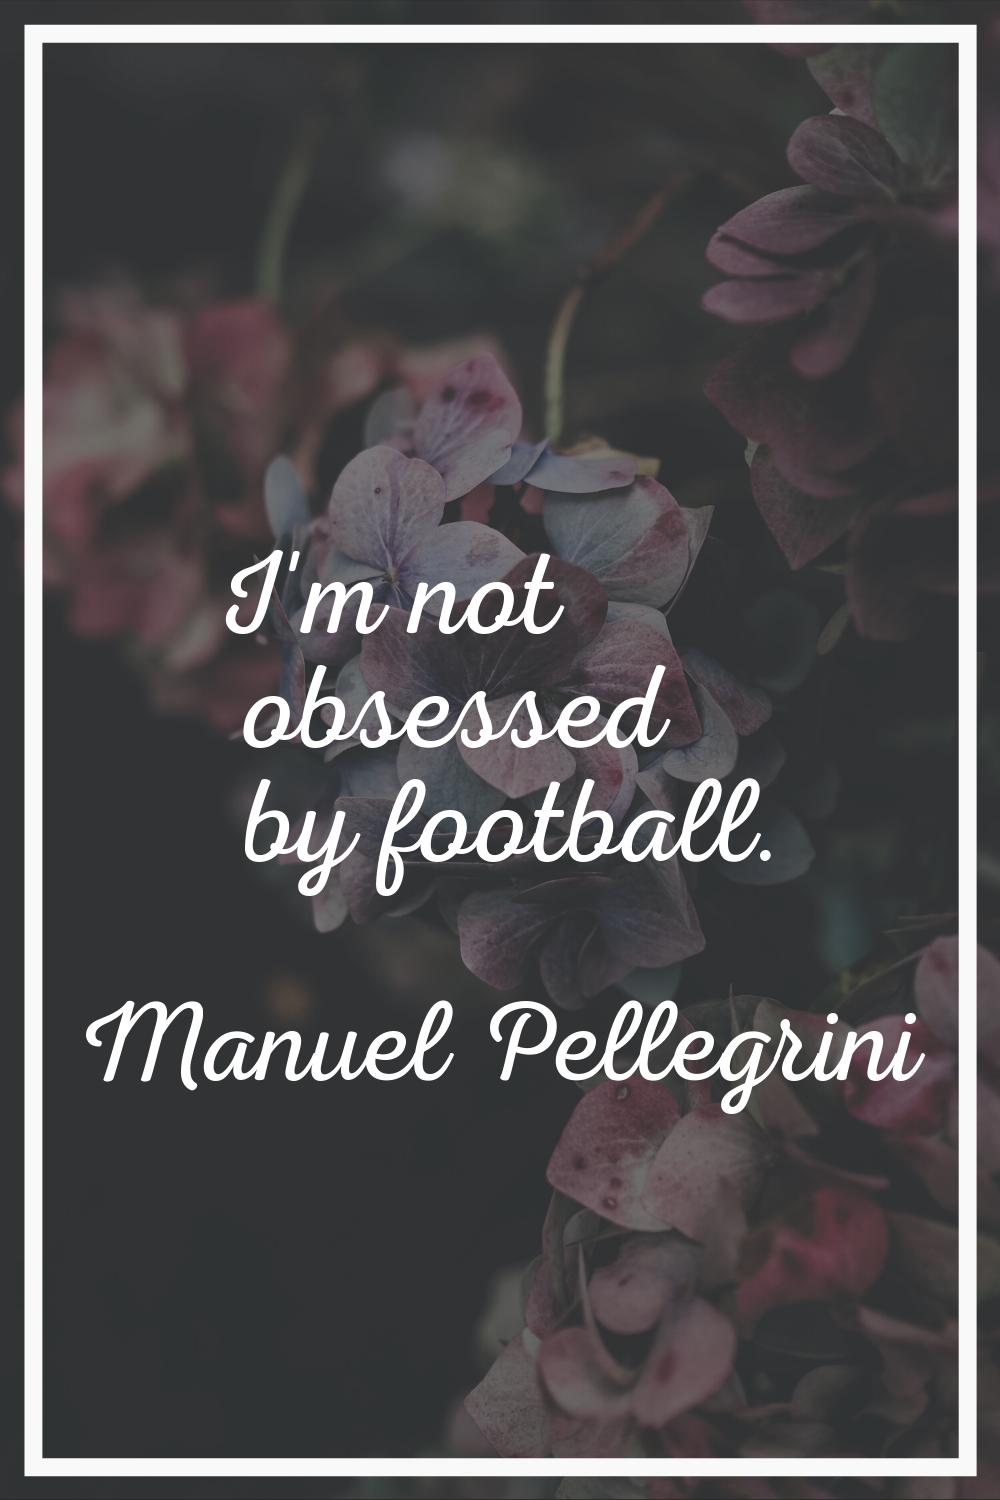 I'm not obsessed by football.